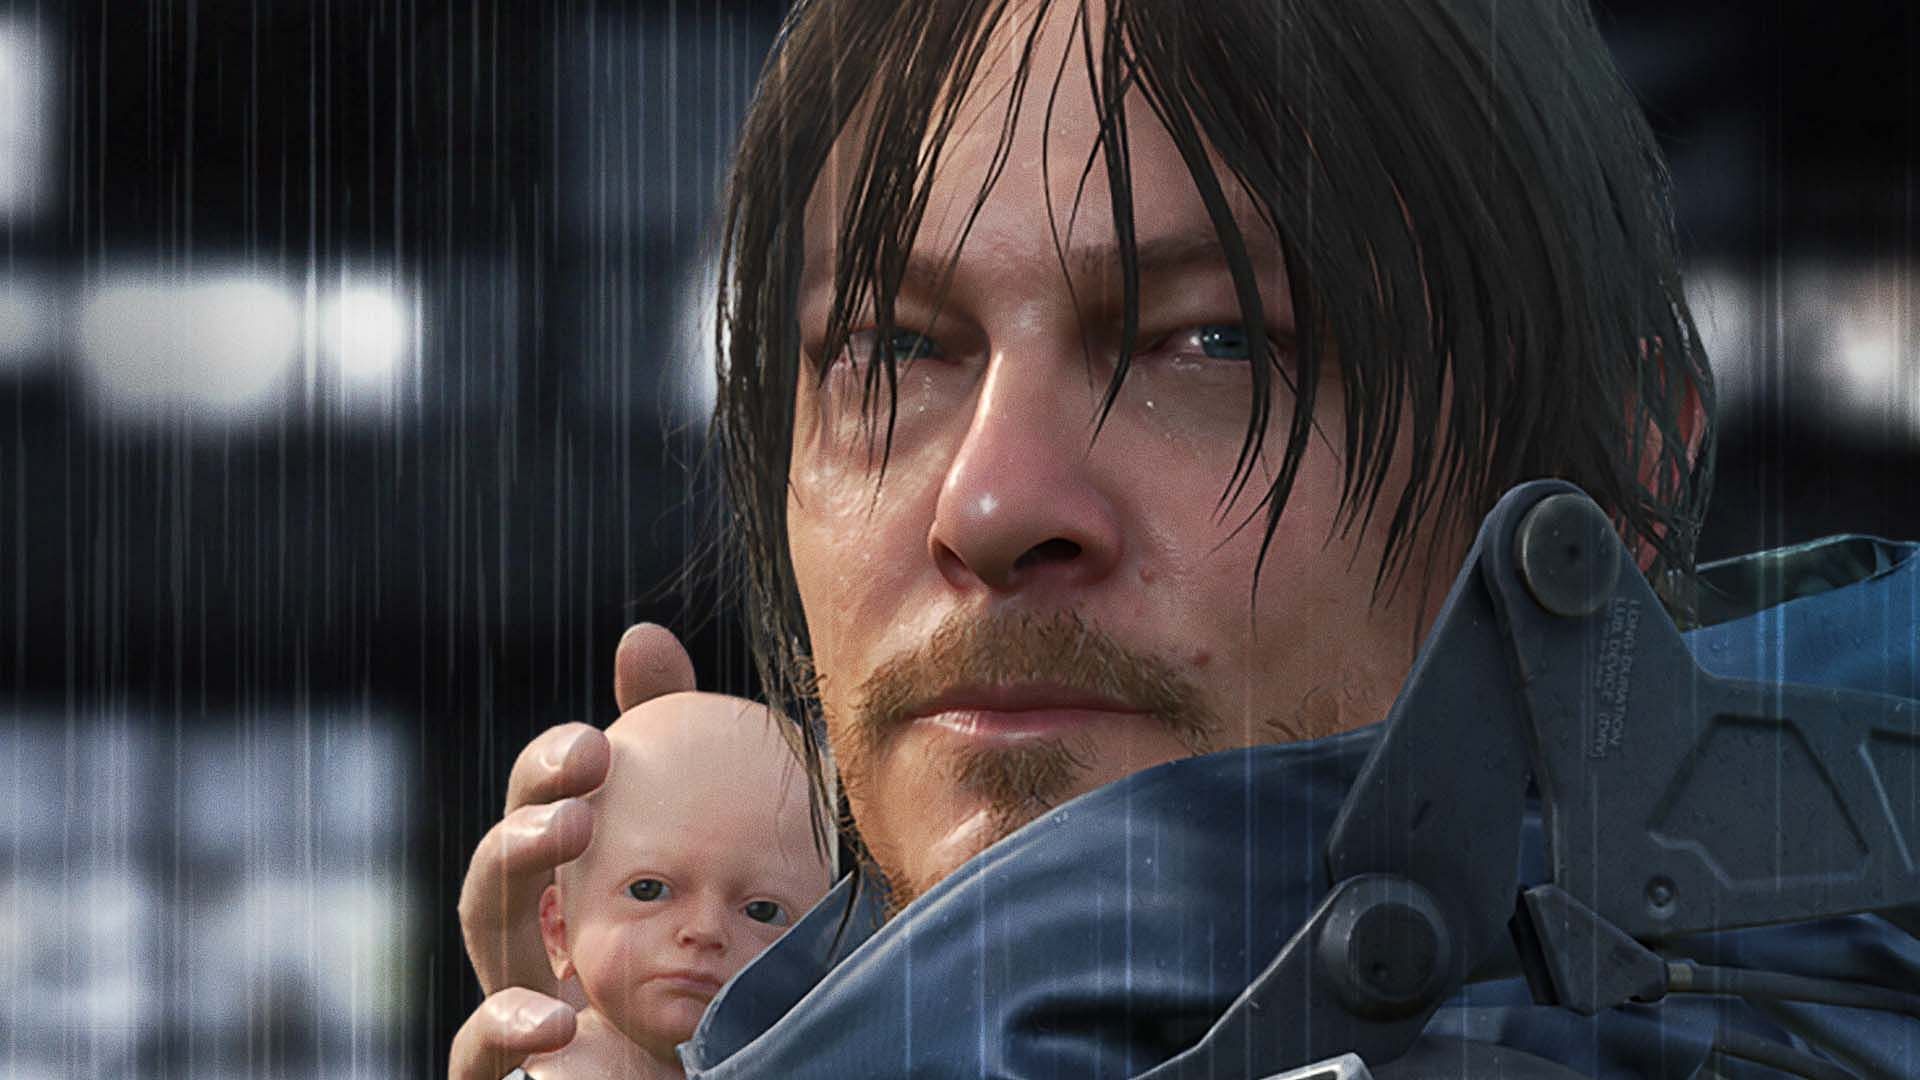 Epic Games Launcher crashes as Death Stranding is released for free